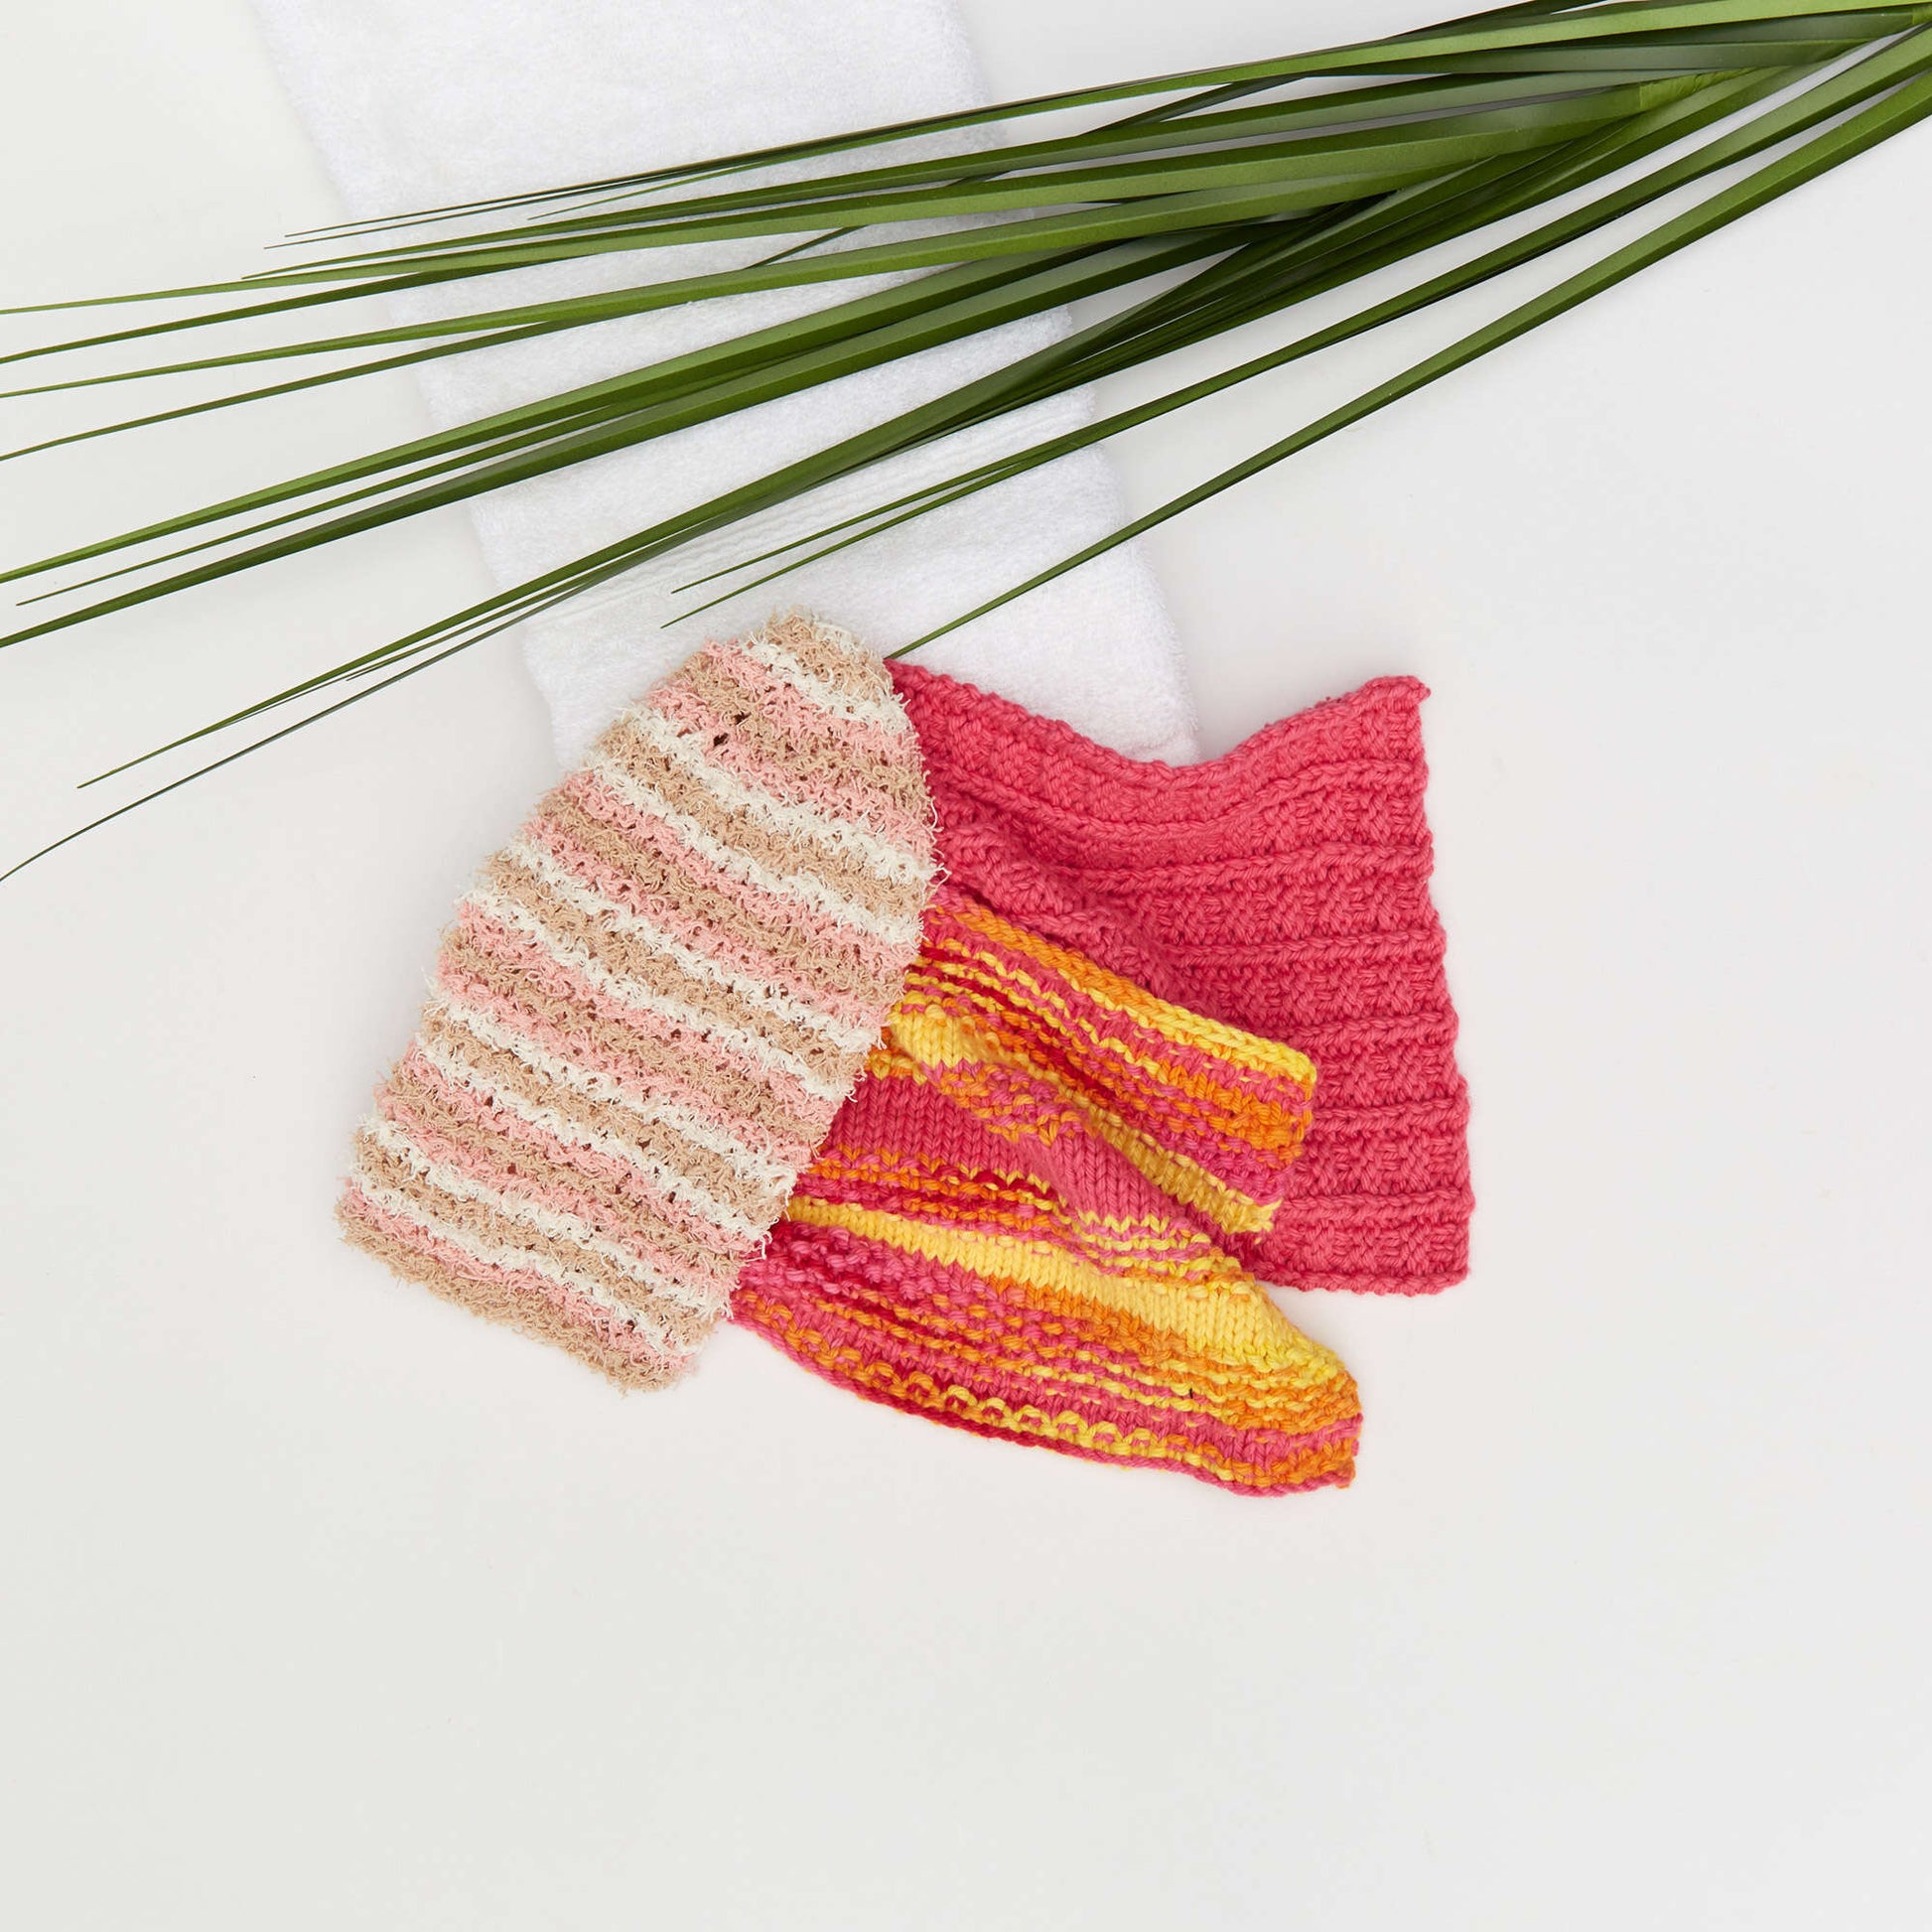 Red Heart Textured Stripes Washcloth Red Heart Textured Stripes Washcloth